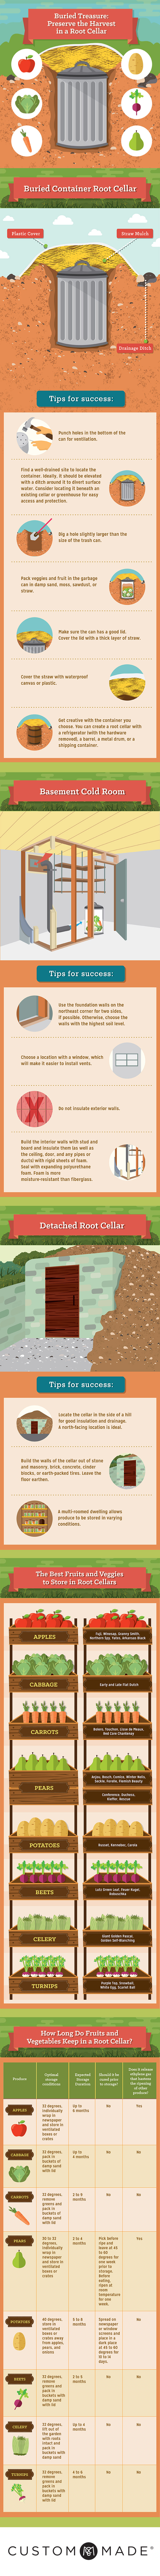 Buried Treasure: Preserve the Harvest in a Root Cellar